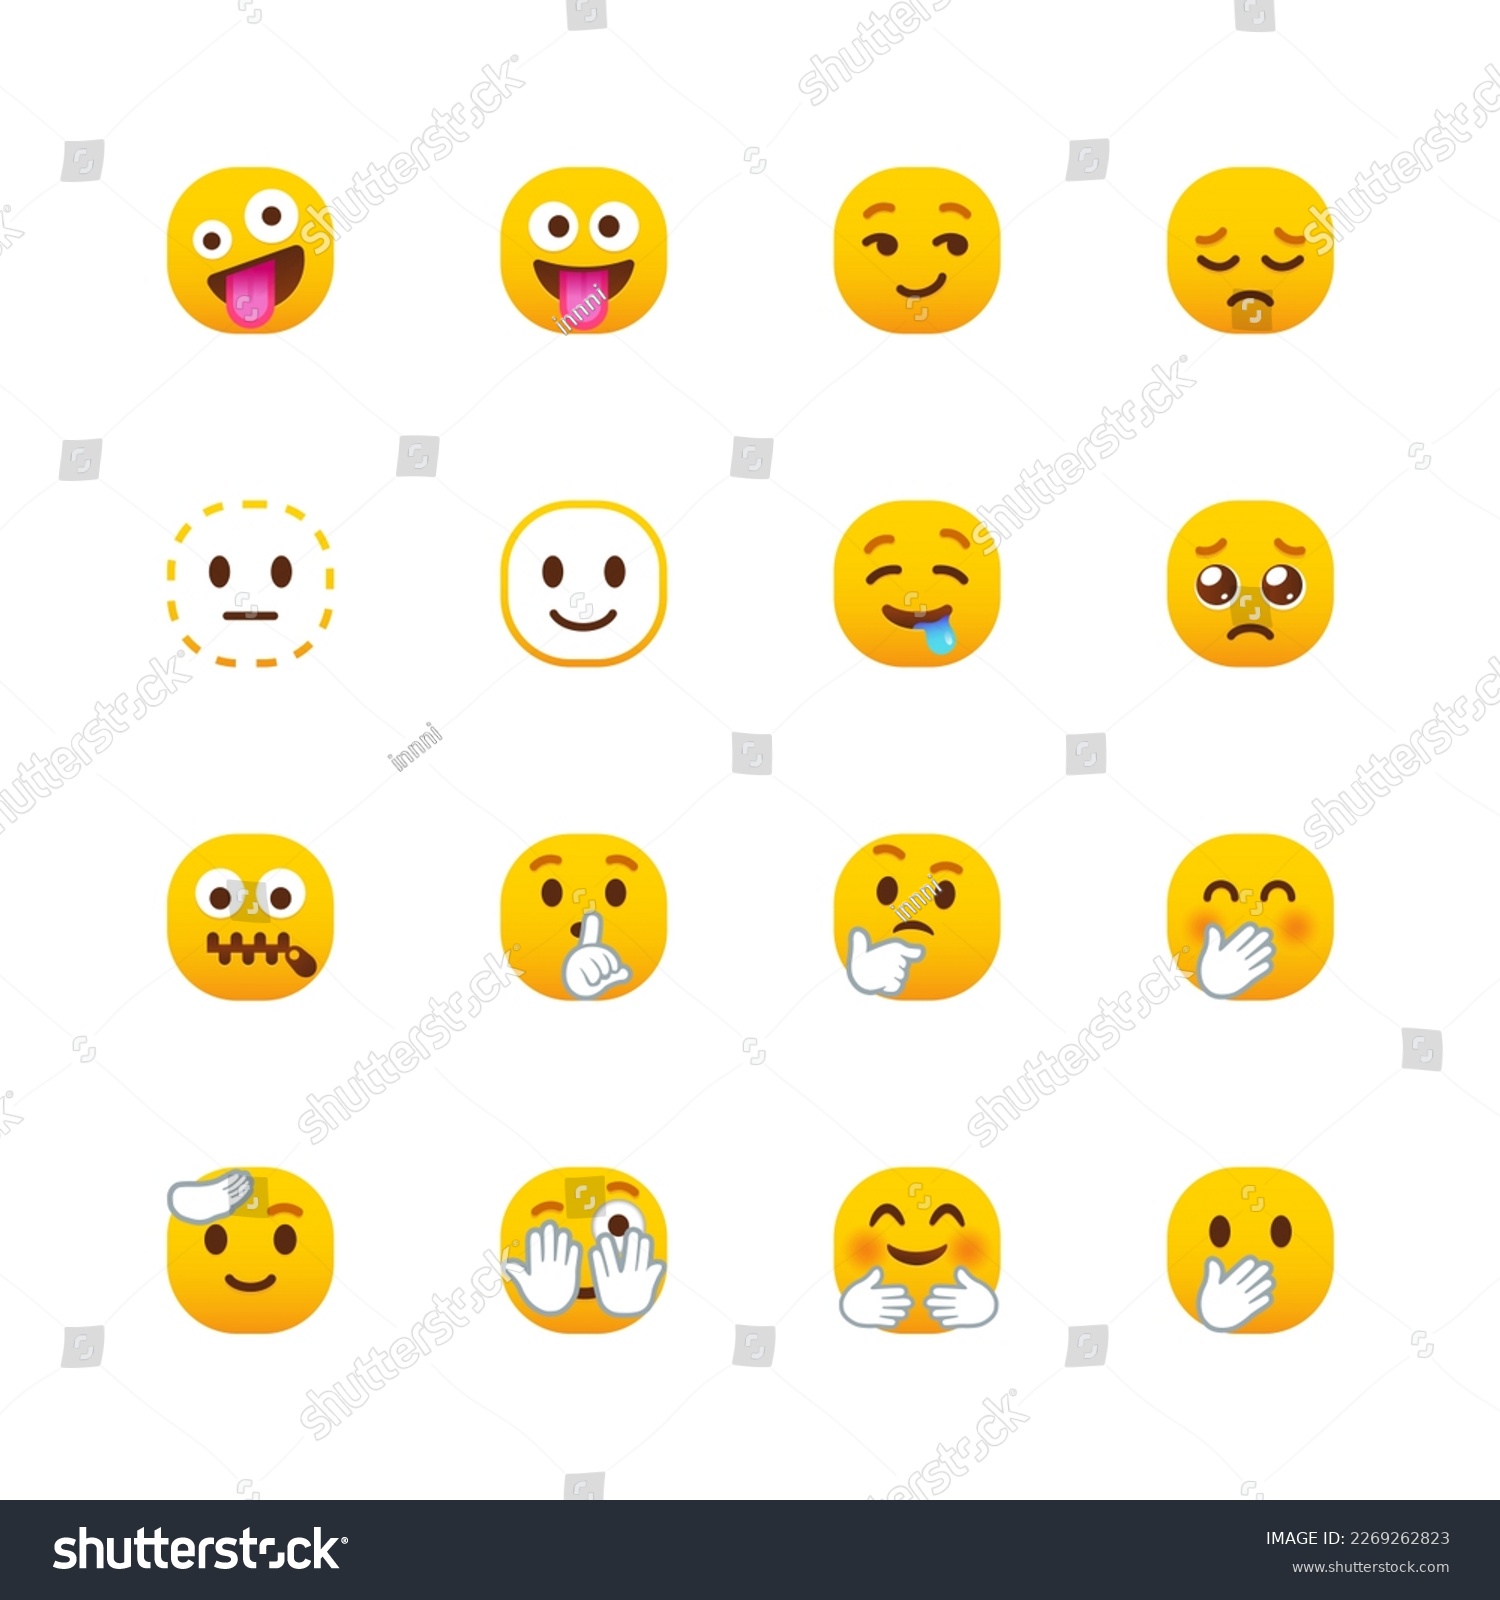 SVG of Rounded Emoji Character Icons Set4 svg